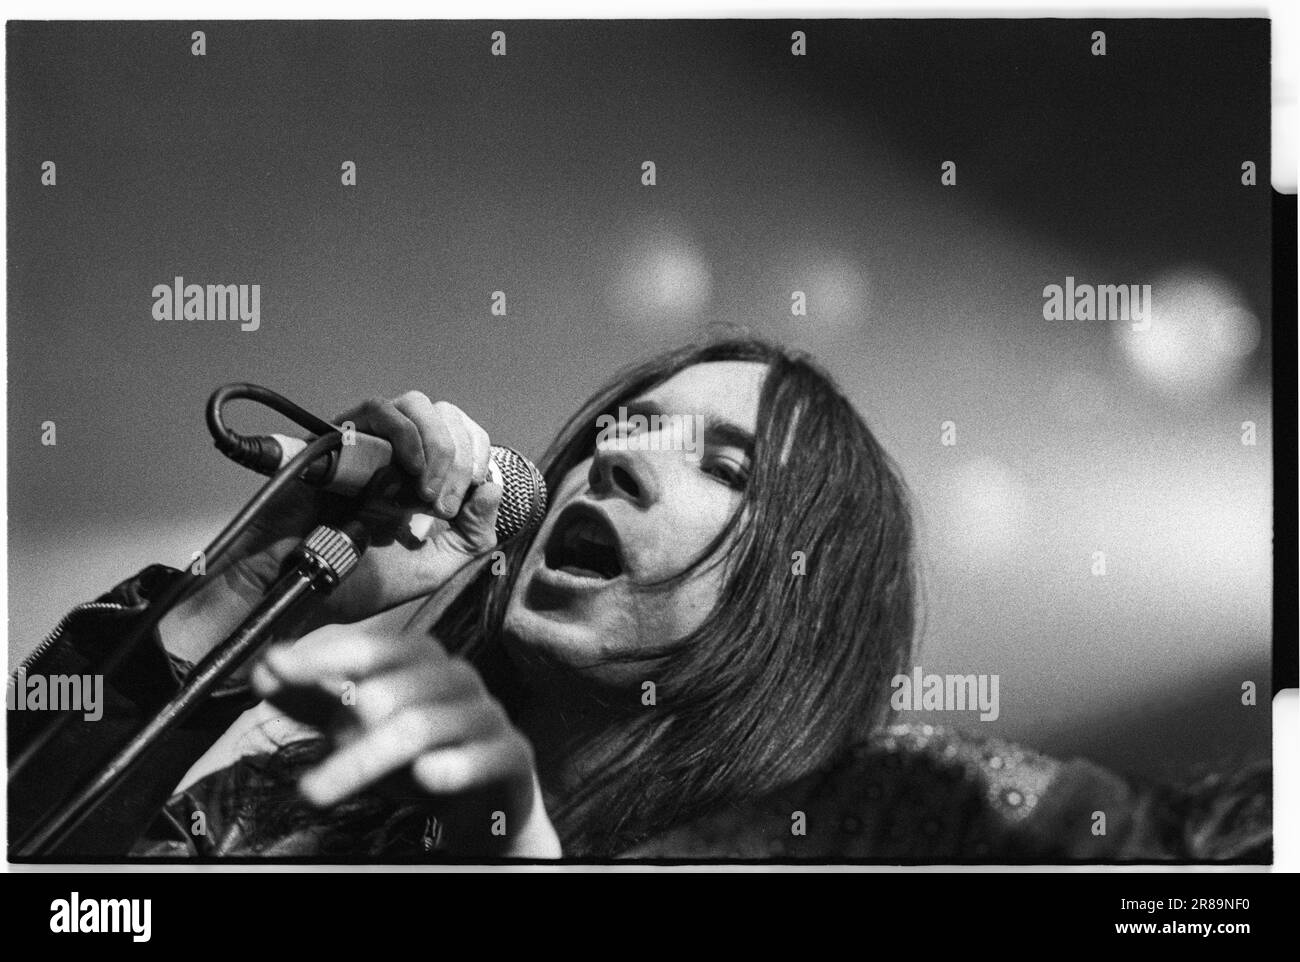 PRIMAL SCREAM, CONCERT, 1994: Bobby Gillespie of Scottish band Primal Scream playing live at the Great Hall, Cardiff University, Wales, UK on 7 April 1994. Photo: Rob Watkins. INFO: rimal Scream, a Scottish rock band, is known for their genre-defying approach. Albums like 'Screamadelica' fused rock with dance and won the Mercury Prize. Their diverse discography spans psychedelic, alternative, and electronic realms, reflecting their evolution and enduring influence. Stock Photo